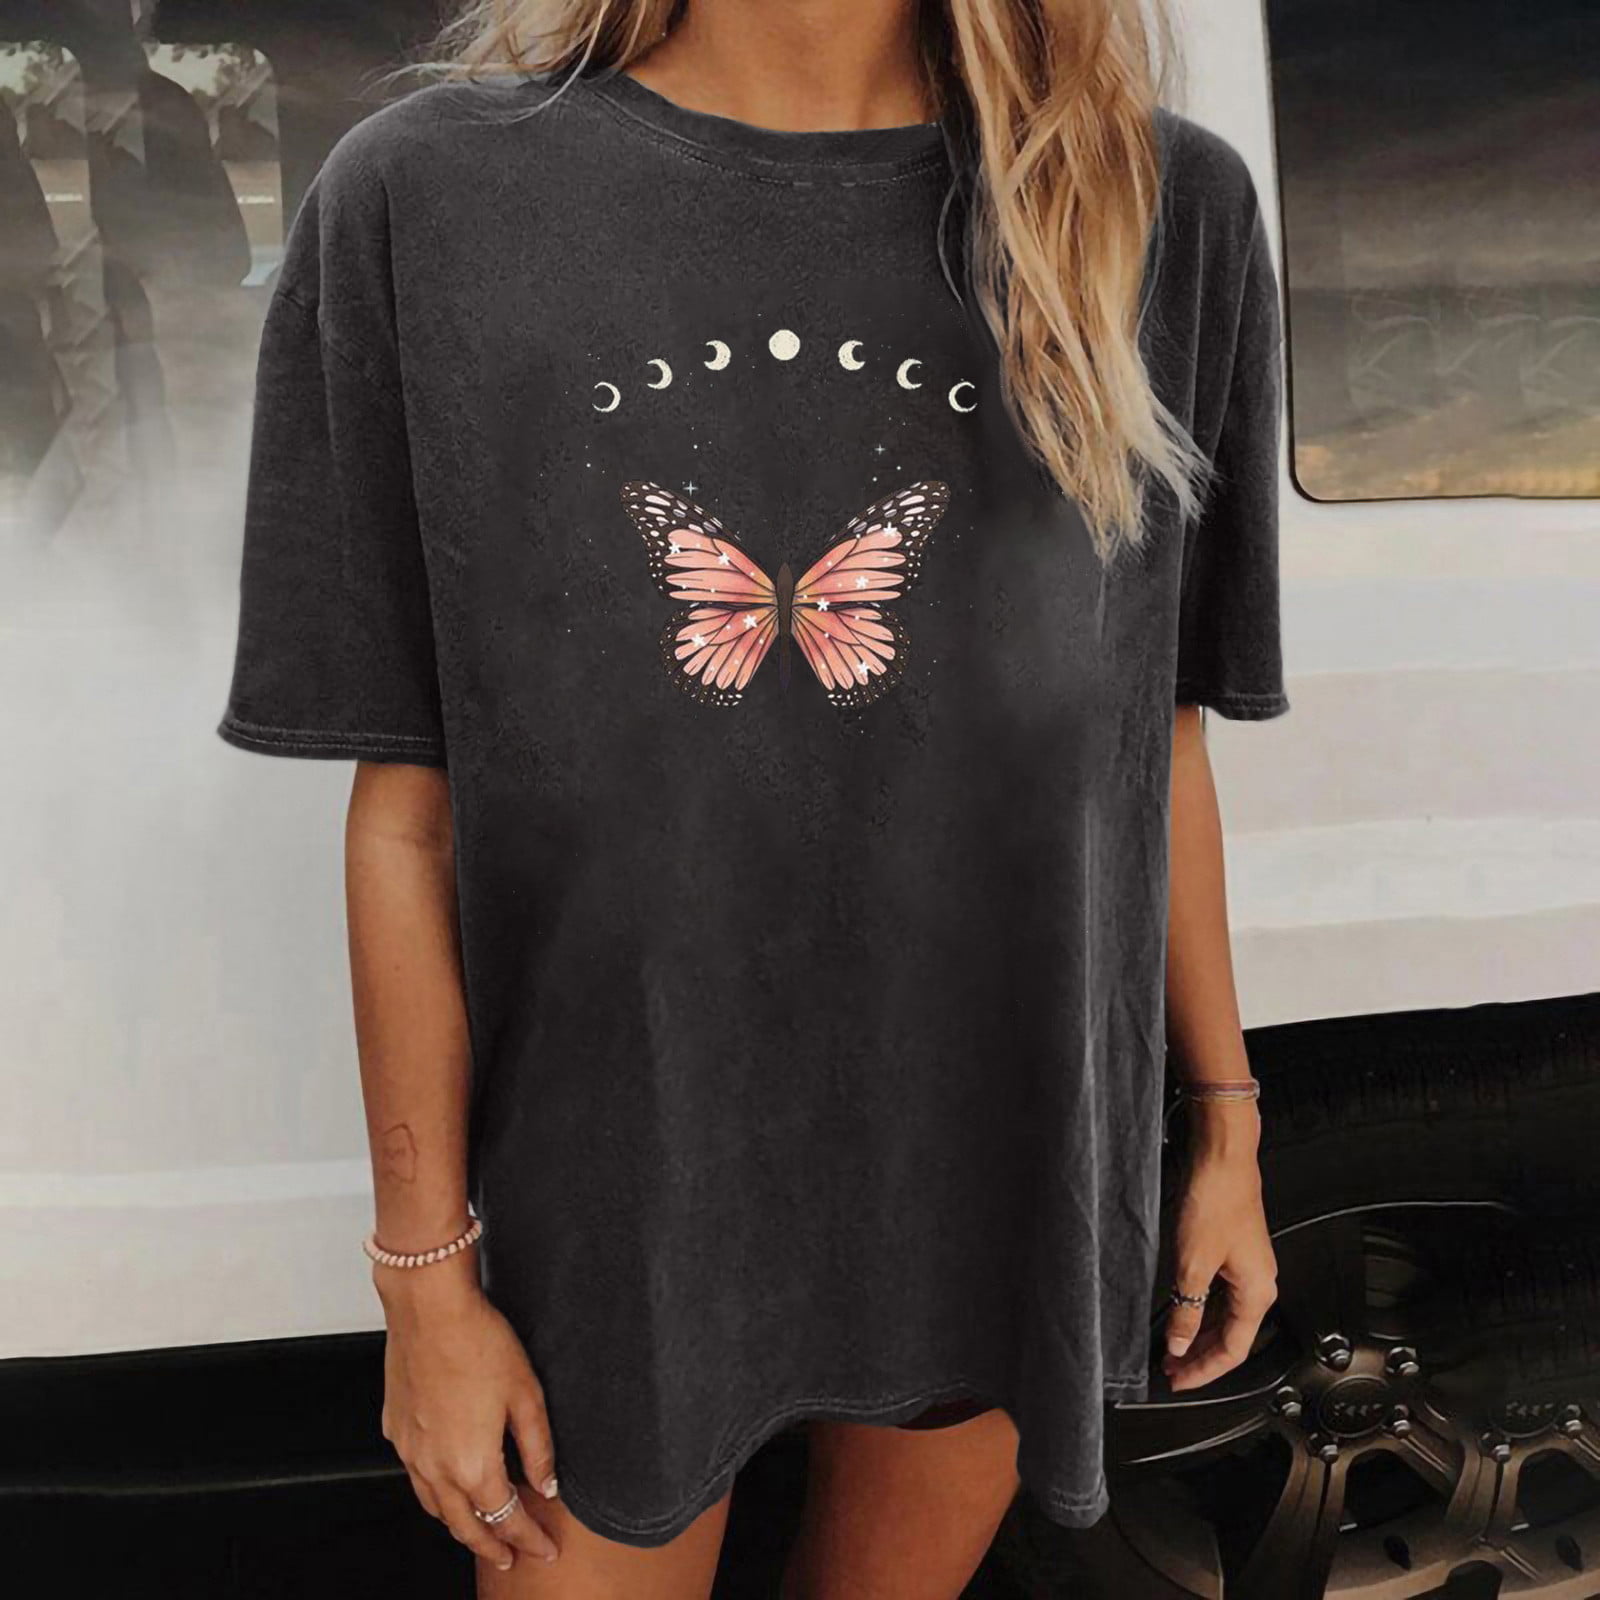 Fkatuzi Butterfly Oversized Vintage T Shirts for Women Sun and Moon Graphic Tee Casual Cotton Crewneck Short Sleeve Gray Tops